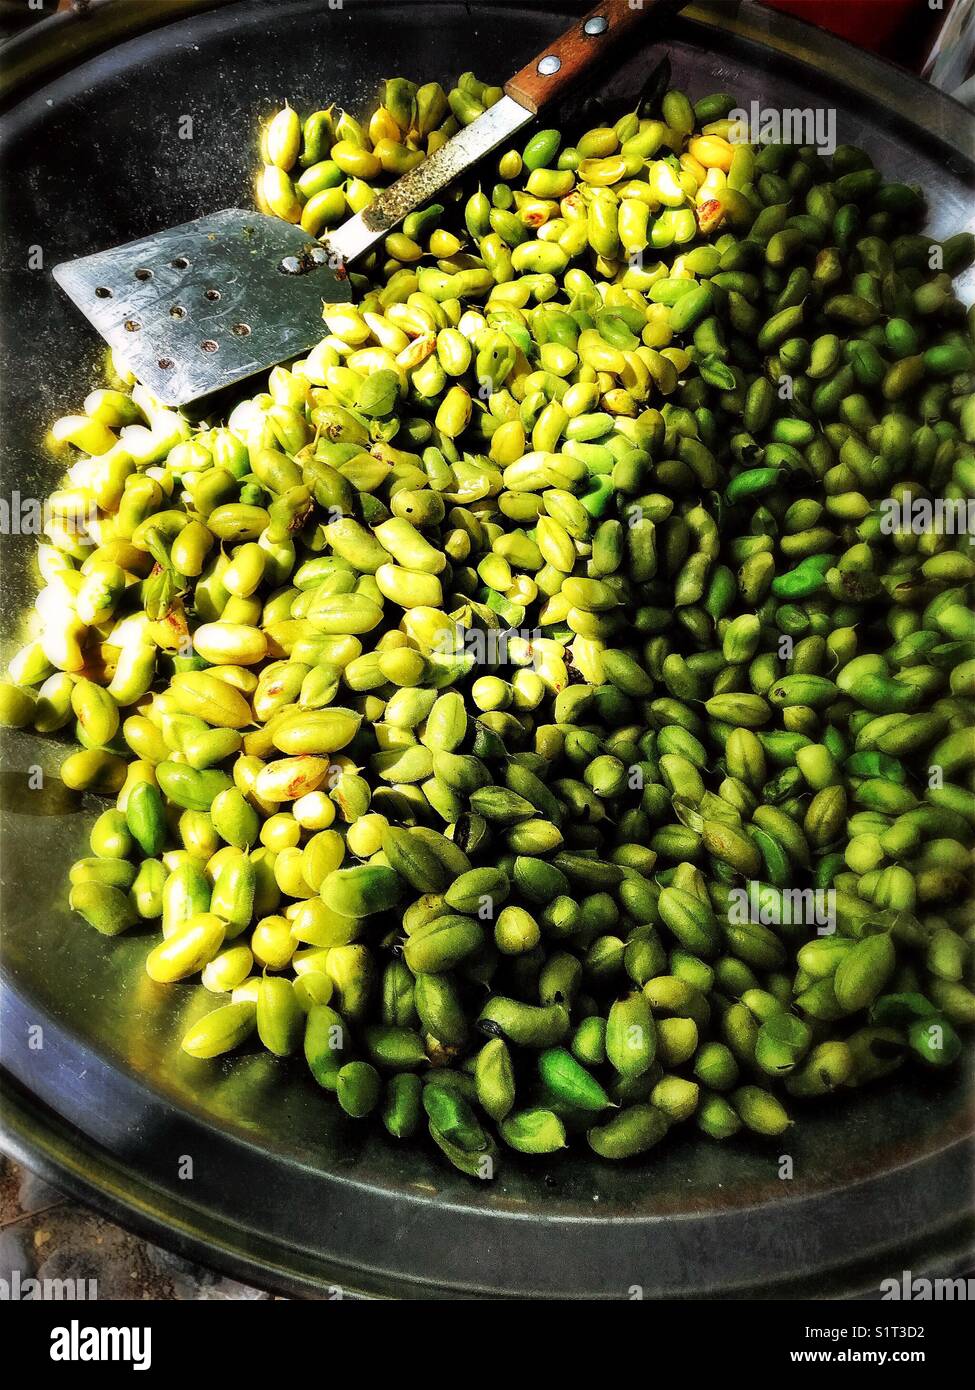 Cooked, Salted garbanzo beans in the pod are offered for sale at a farmers market in Mexico. Stock Photo